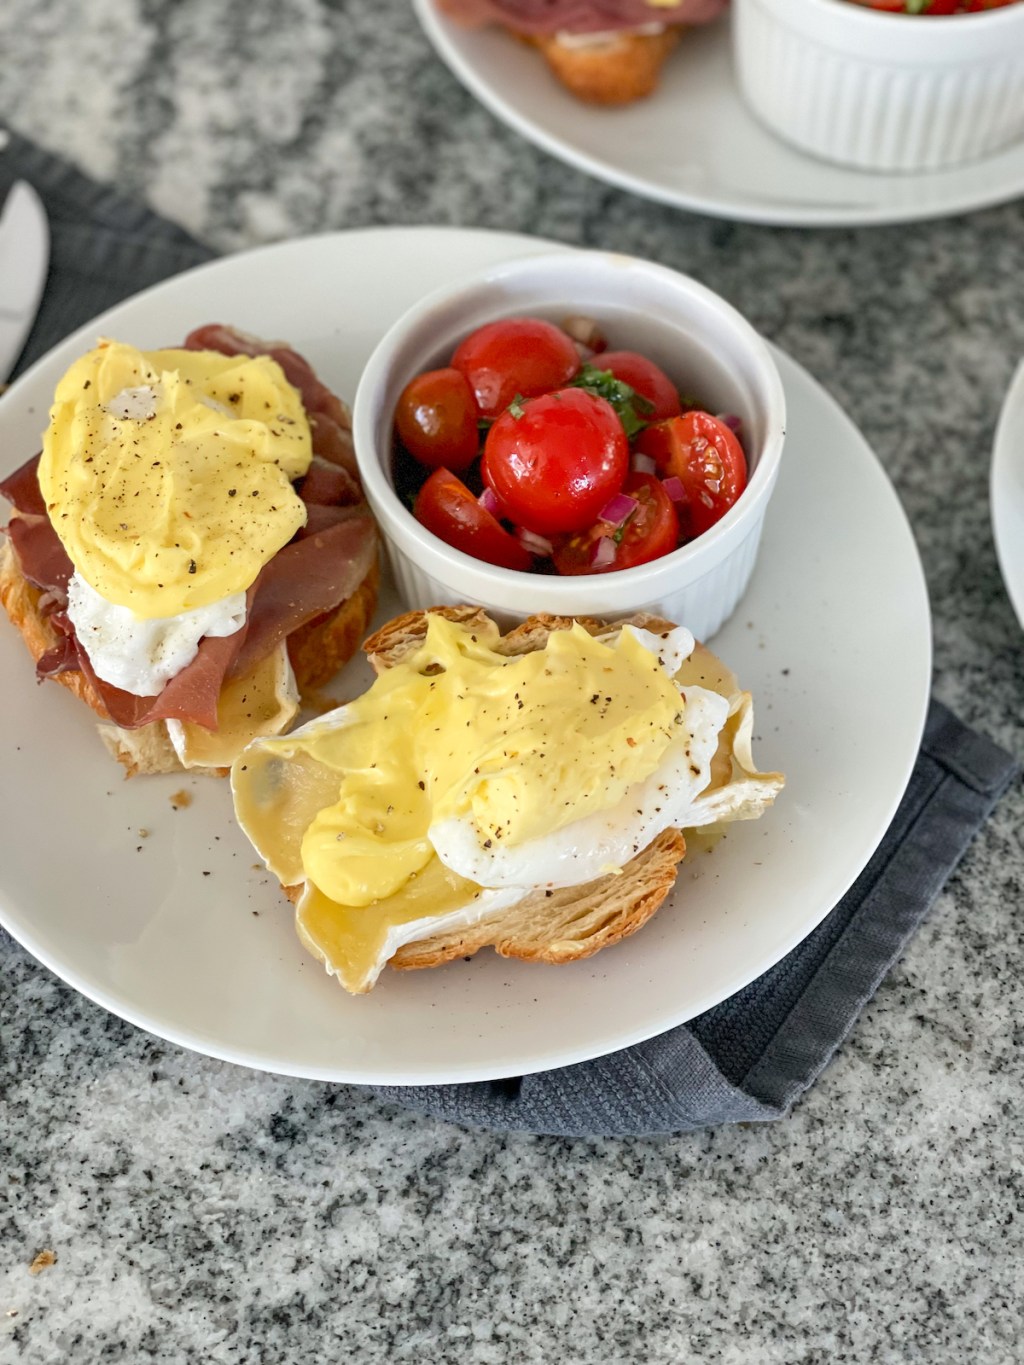 keto eggs benedict plated with a tomato salad